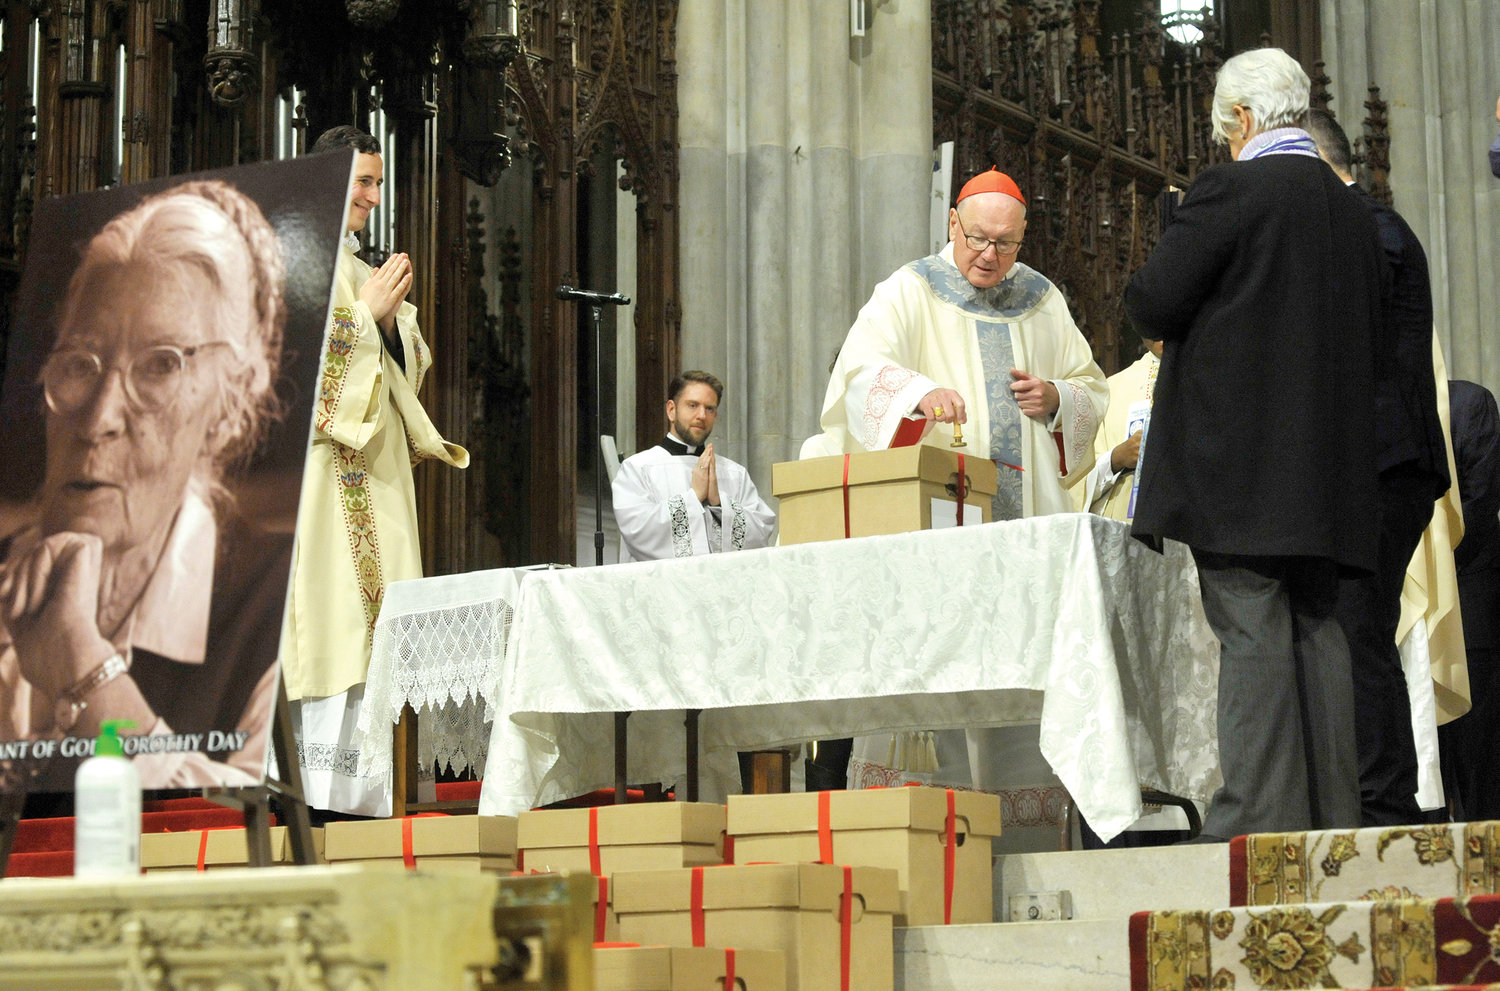 Cardinal Dolan stamps a heated wax seal atop a ribbon on a box, marking the conclusion of the diocesan phase of the canonization cause for Servant of God Dorothy Day during Mass Dec. 8 at St. Patrick’s Cathedral.